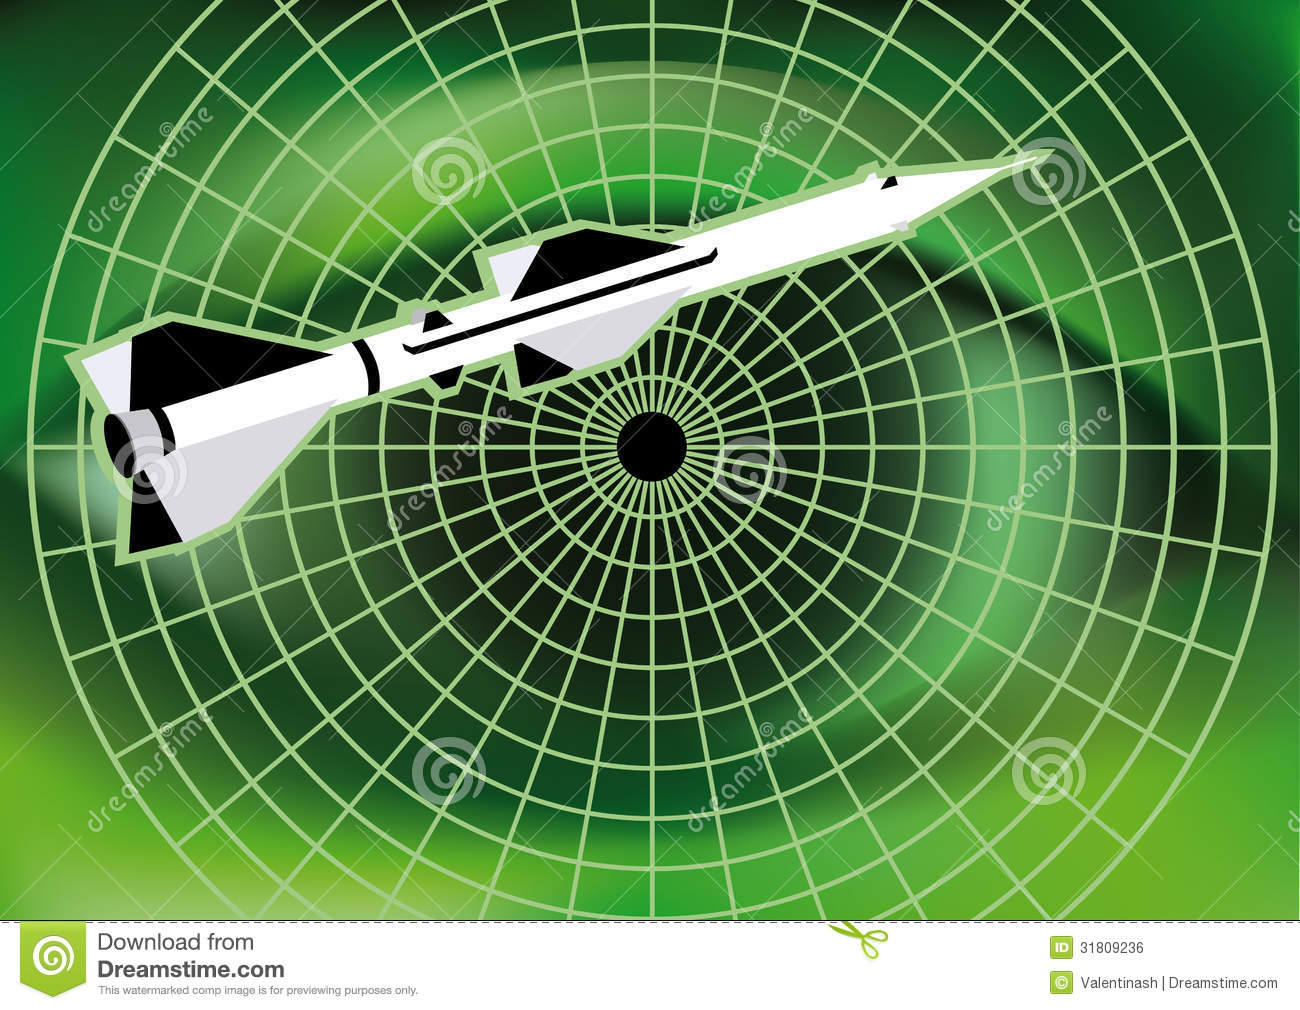 The Flying Missile And Radar On The Background Of A Large Green Human    